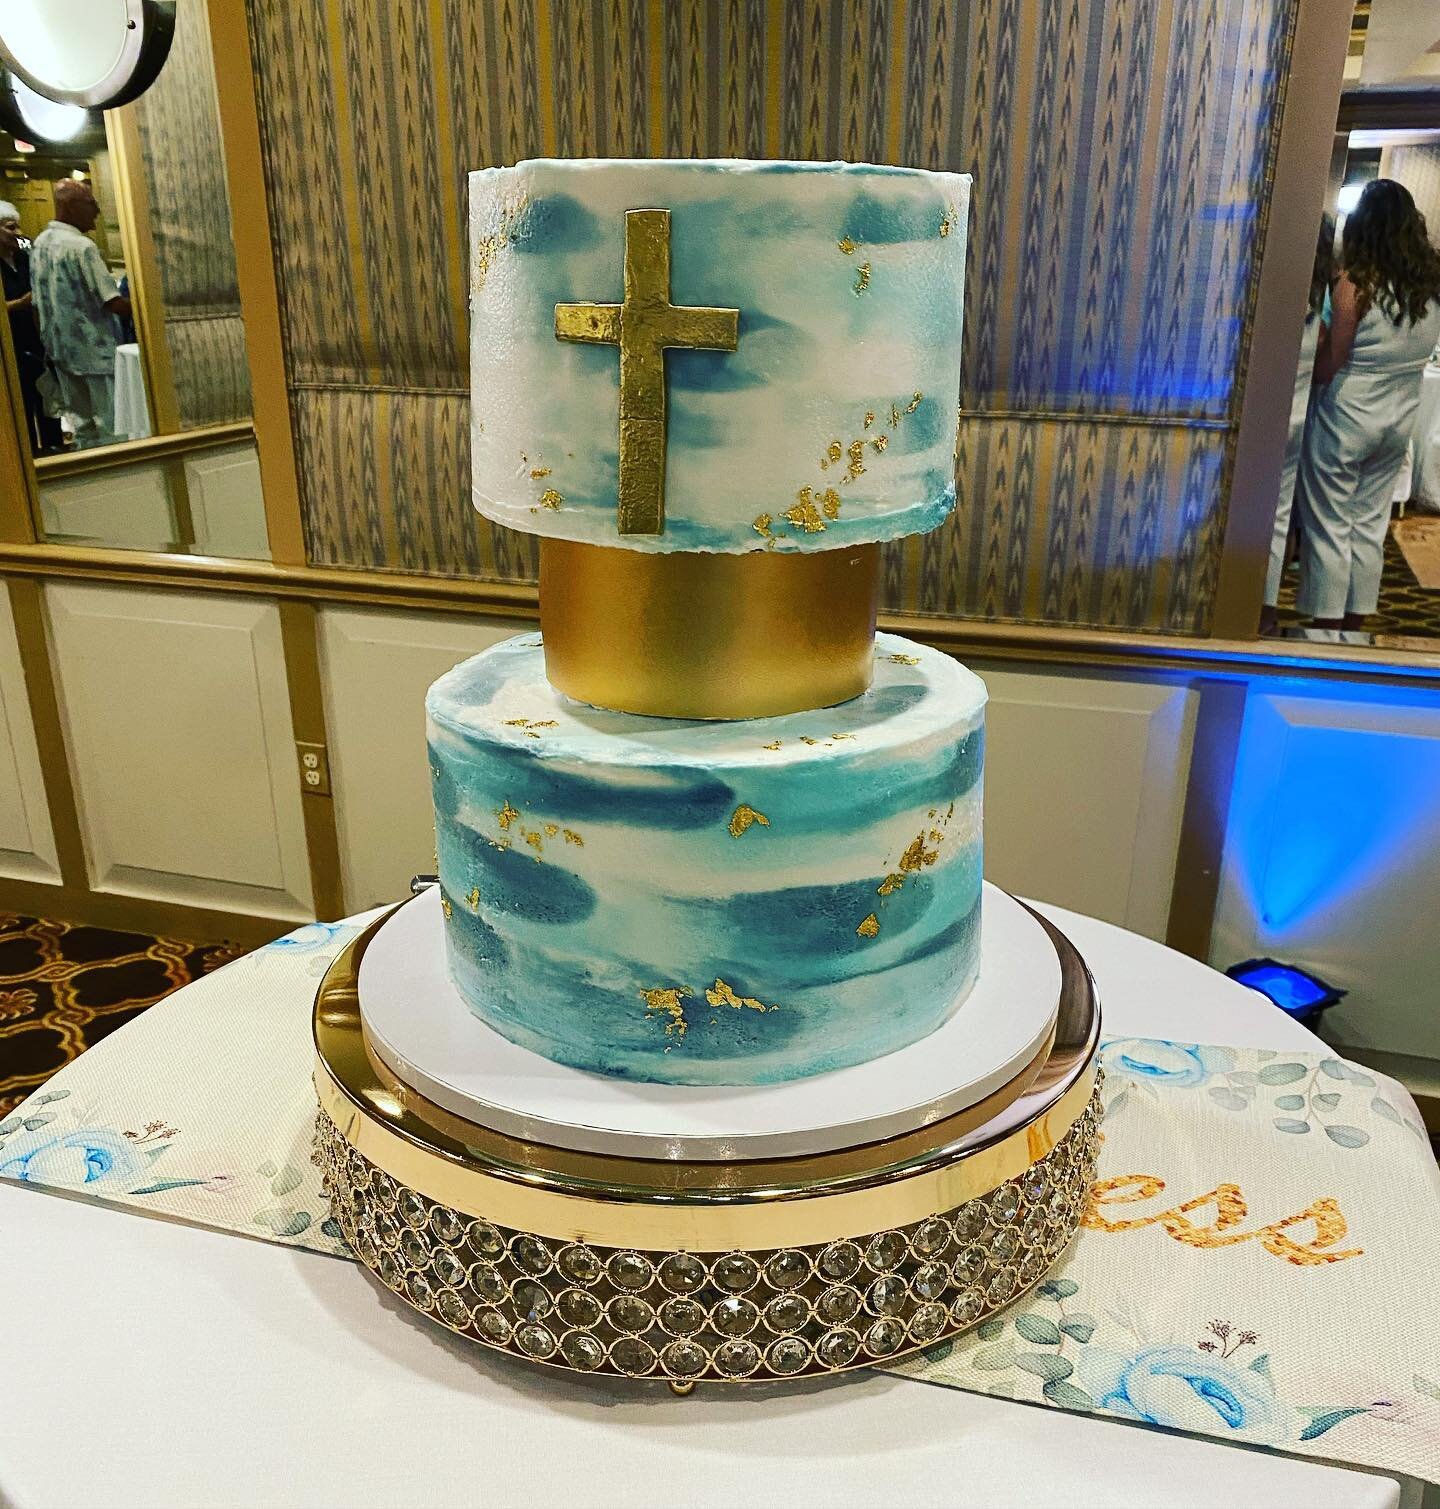 Special baptism cake for my nephew baby Anthony ⛪️💙